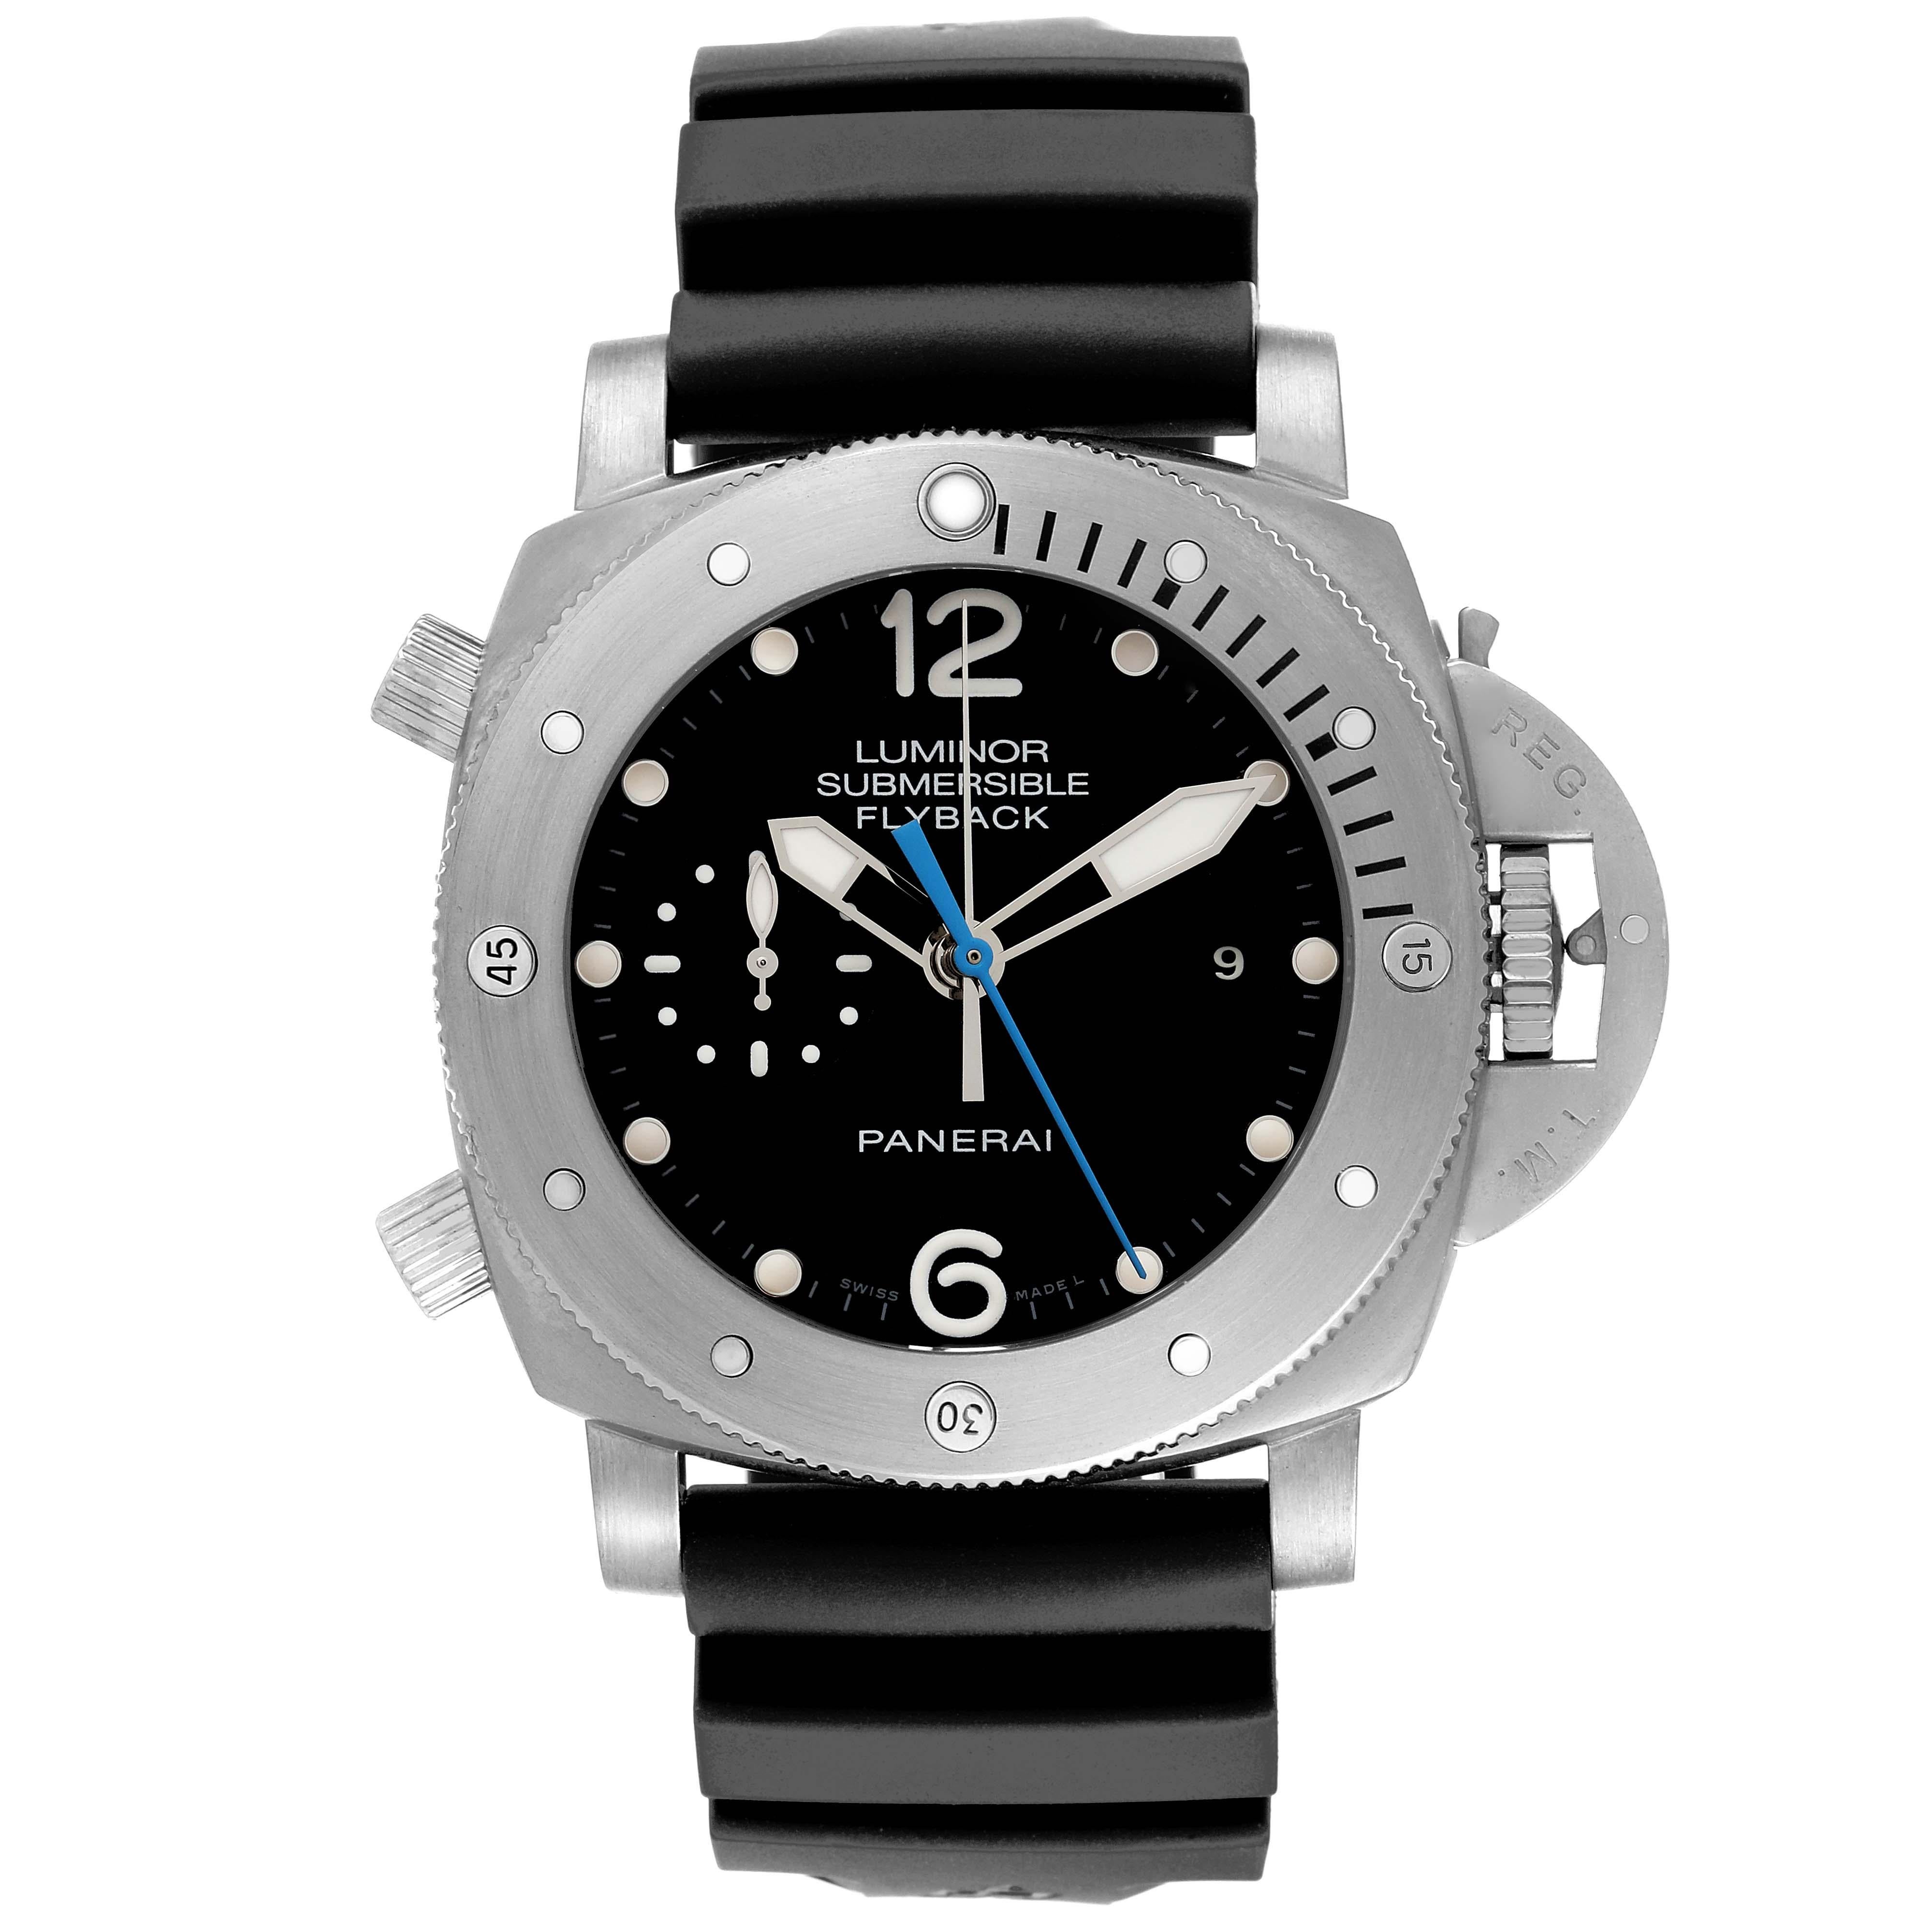 Panerai Luminor Submersible Chrono Flyback Mens Watch PAM00614 Papers. Automatic self-winding movement. Two part cushion shaped titanium case 47.0 mm in diameter. Panerai patented crown protector. Anti-clockwise unidirectional rotating titanium